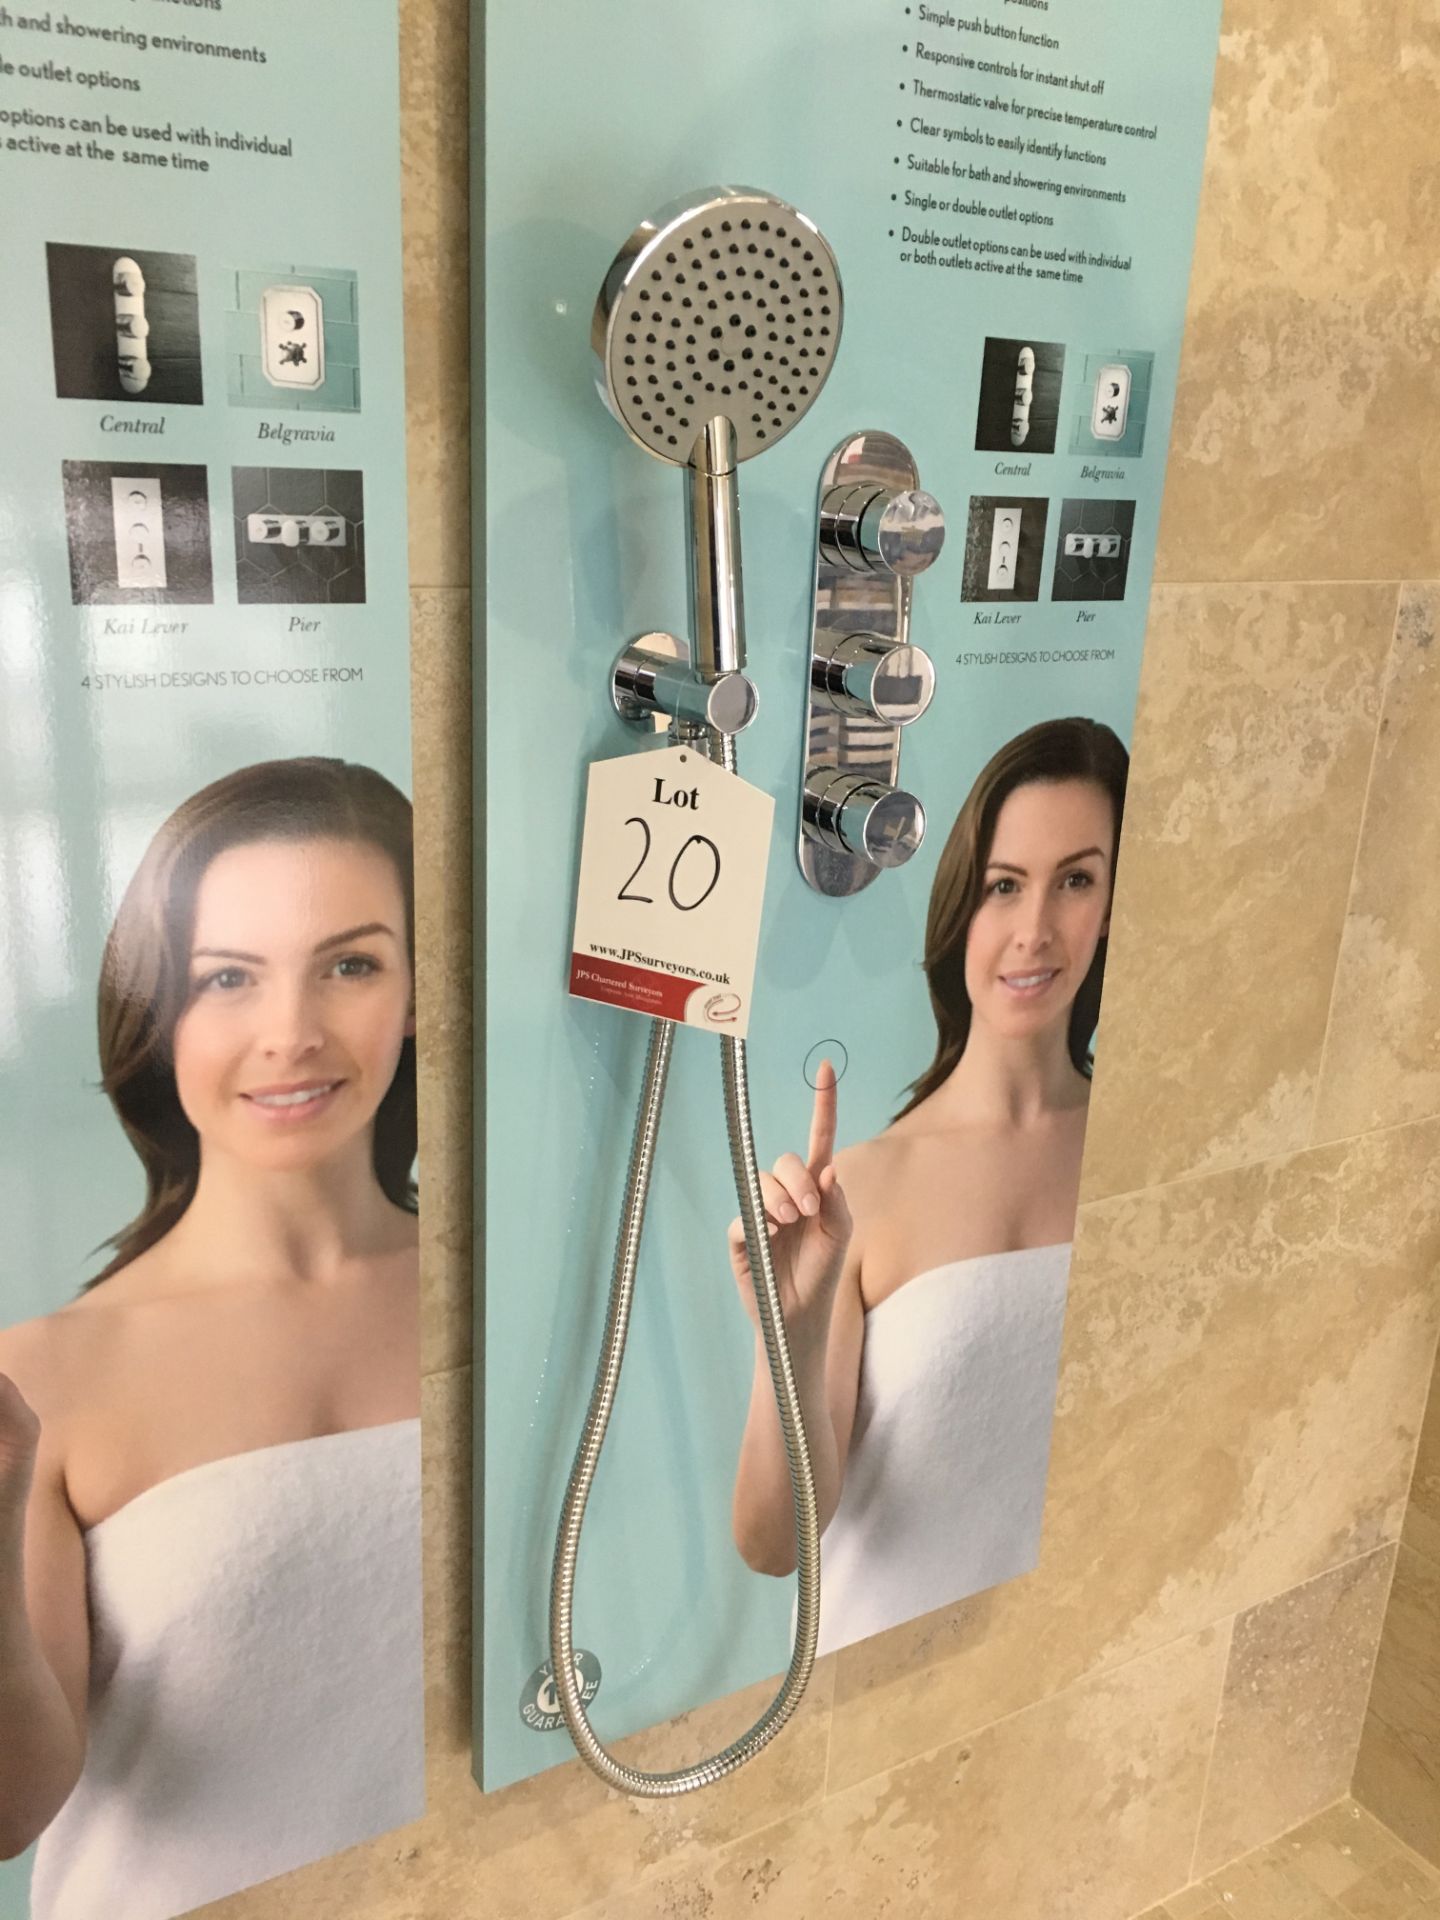 3 x Crosswater dial shower displays (2x central, 1 x pier)